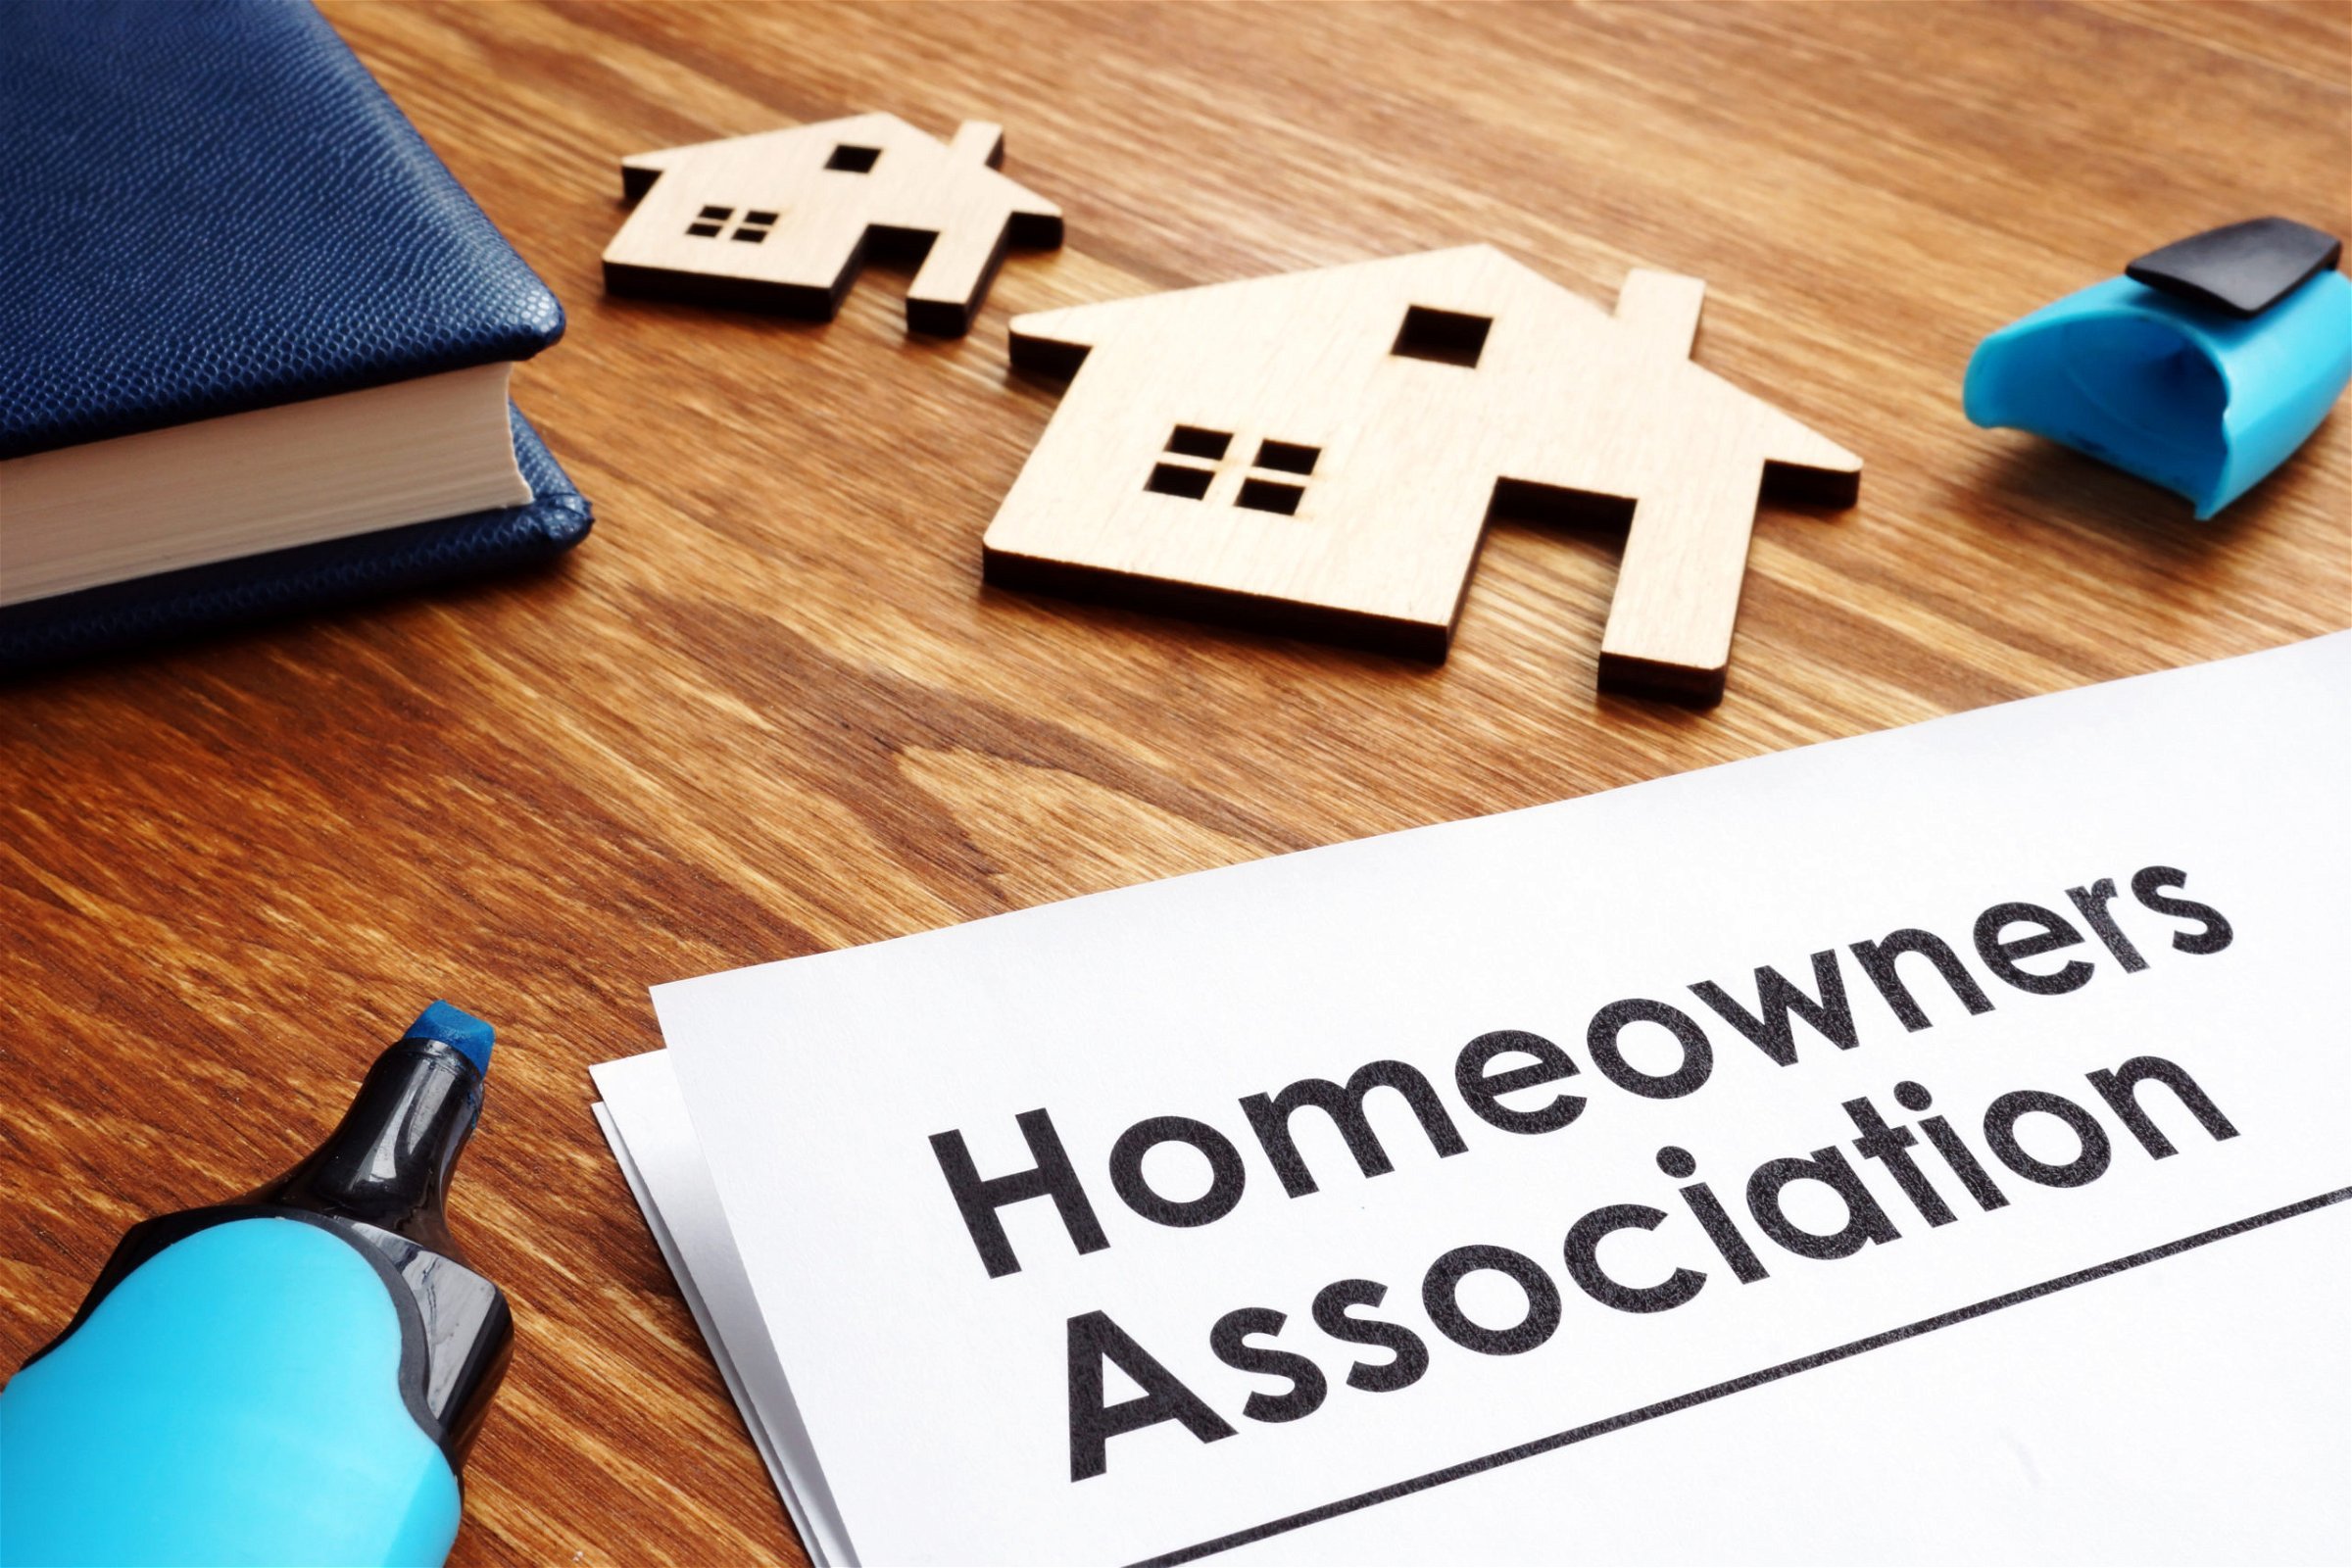 Homeowners Association scaled